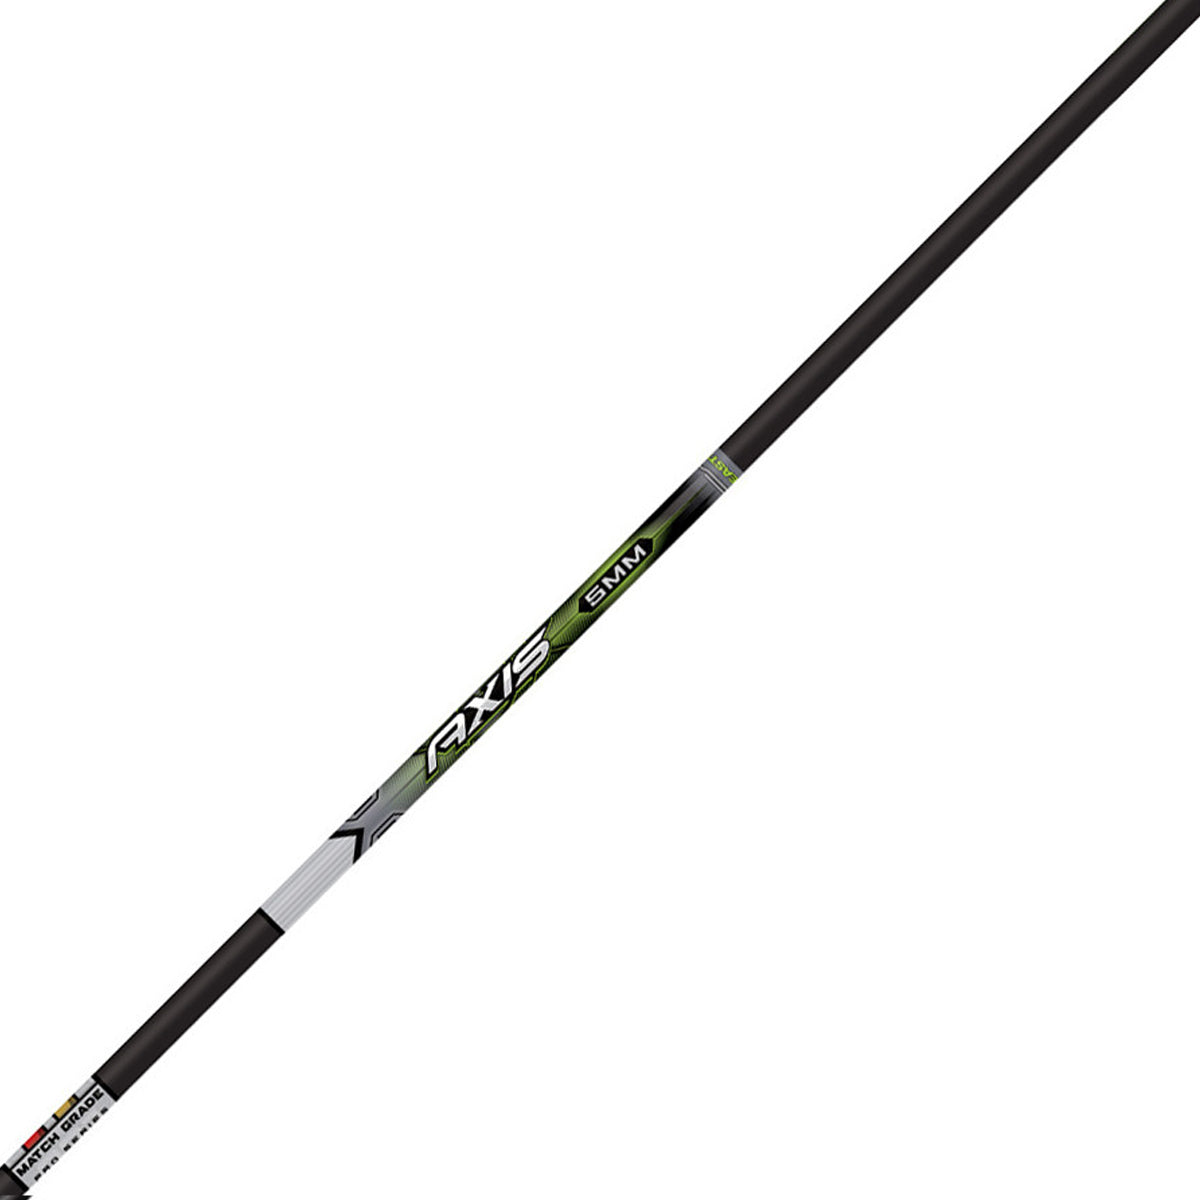 Easton 5mm Axis Pro Series Match Grade Arrow Shafts - 12 Count by Easton | Archery - goHUNT Shop